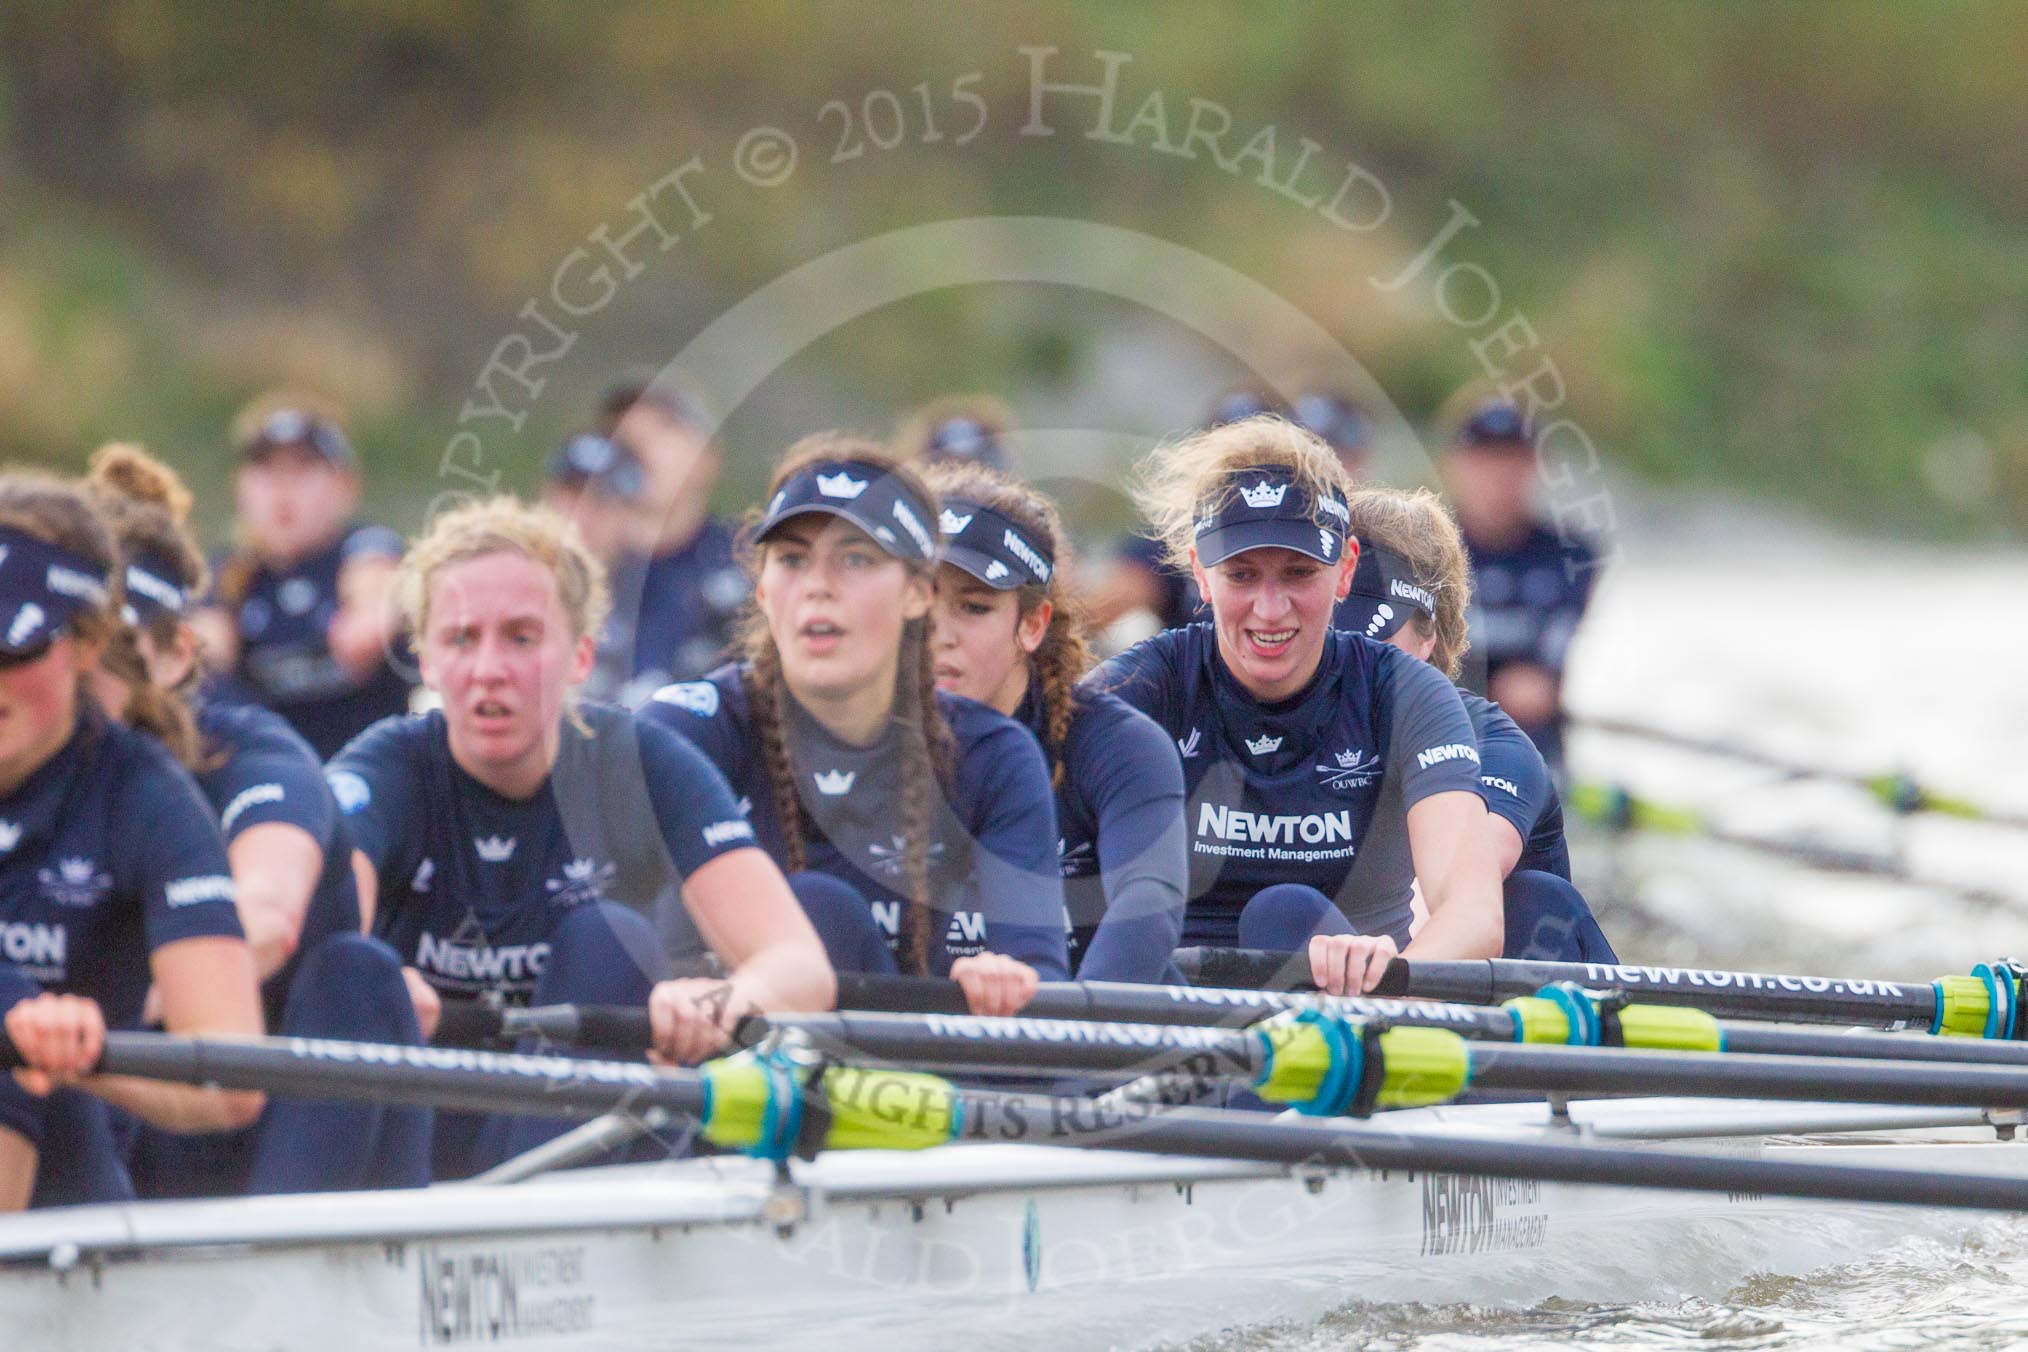 The Boat Race season 2016 - Women's Boat Race Trial Eights (OUWBC, Oxford): "Scylla", here 5-Anastasia Chitty, 4-Rebecca Te Water Naude, 3-Elettra Ardissino, 2-Merel Lefferts, bow-Issy Dodds.
River Thames between Putney Bridge and Mortlake,
London SW15,

United Kingdom,
on 10 December 2015 at 12:34, image #290